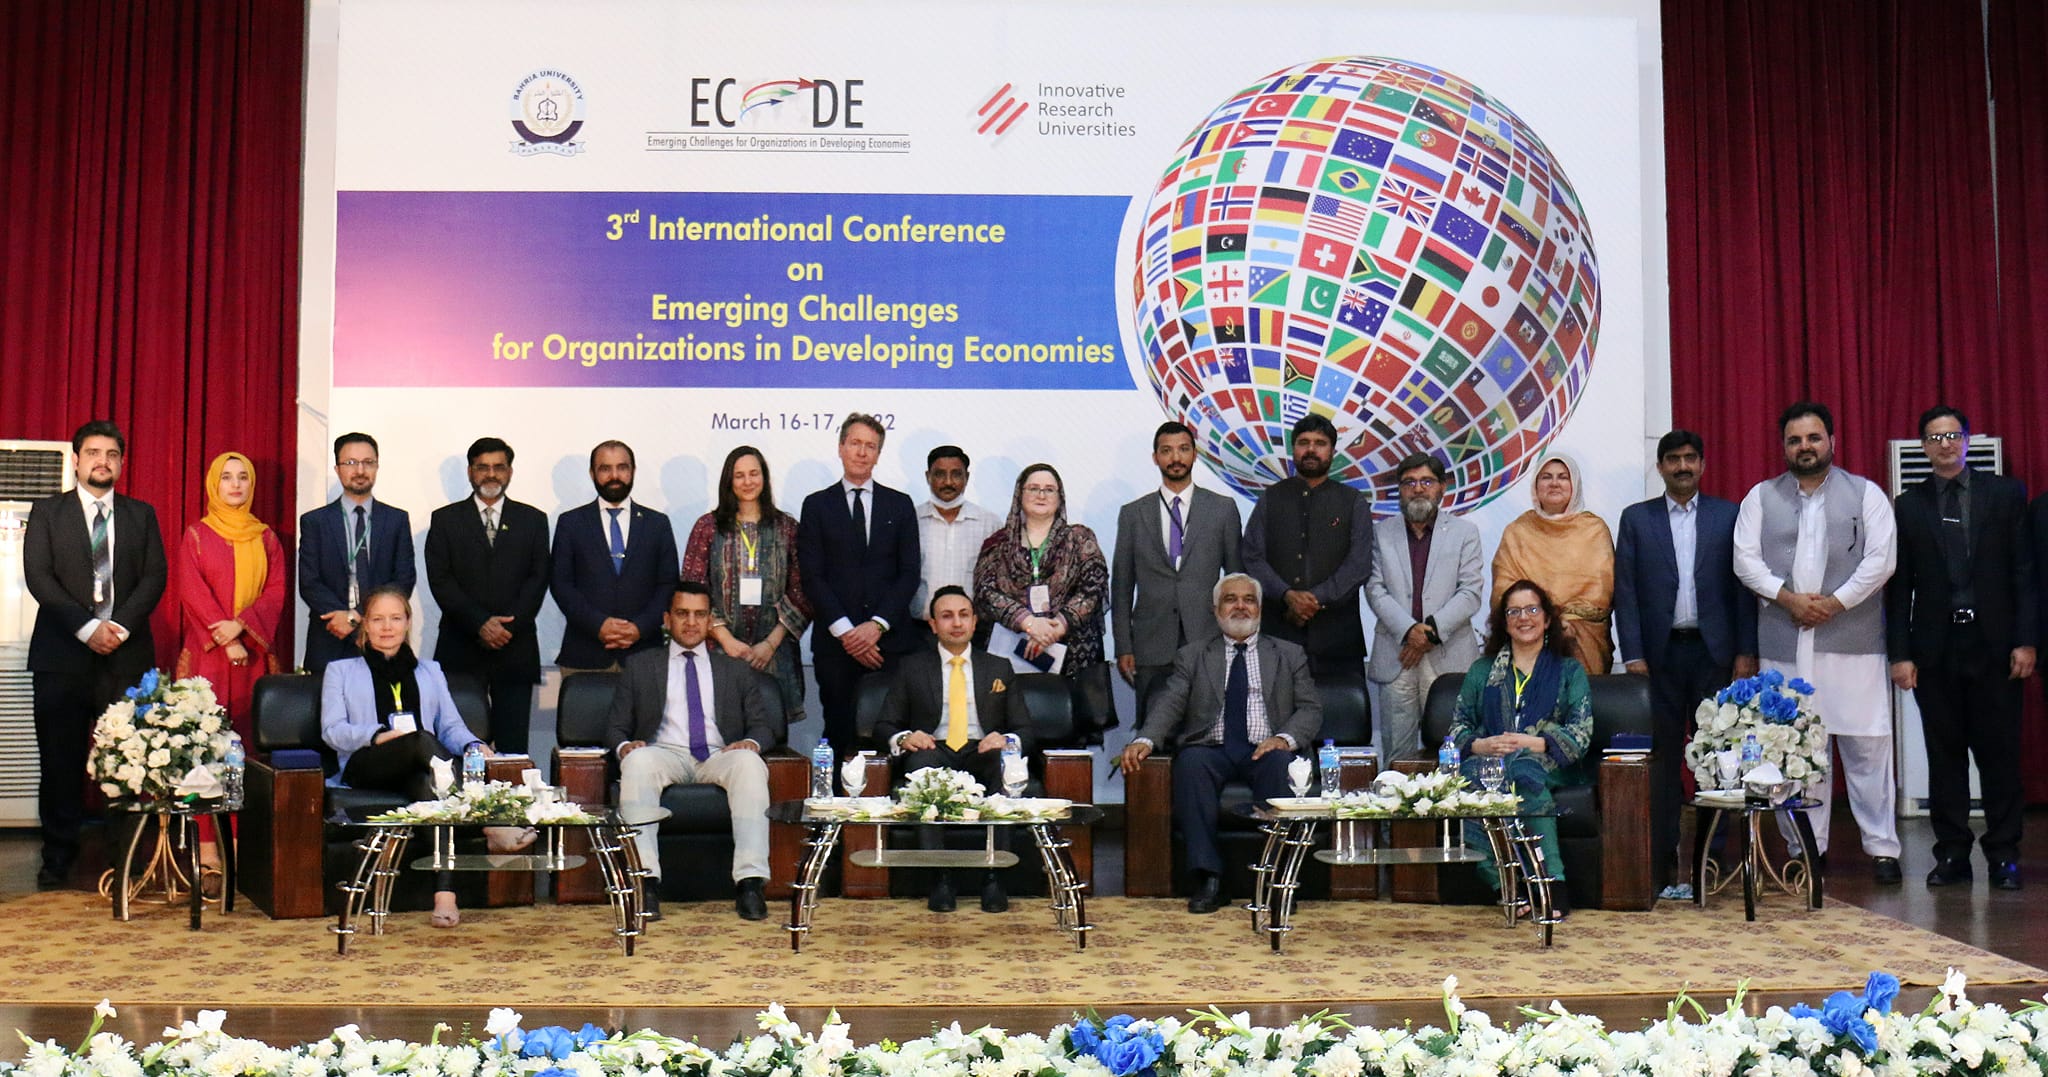 The closing ceremony of the international conference - all speakers together.